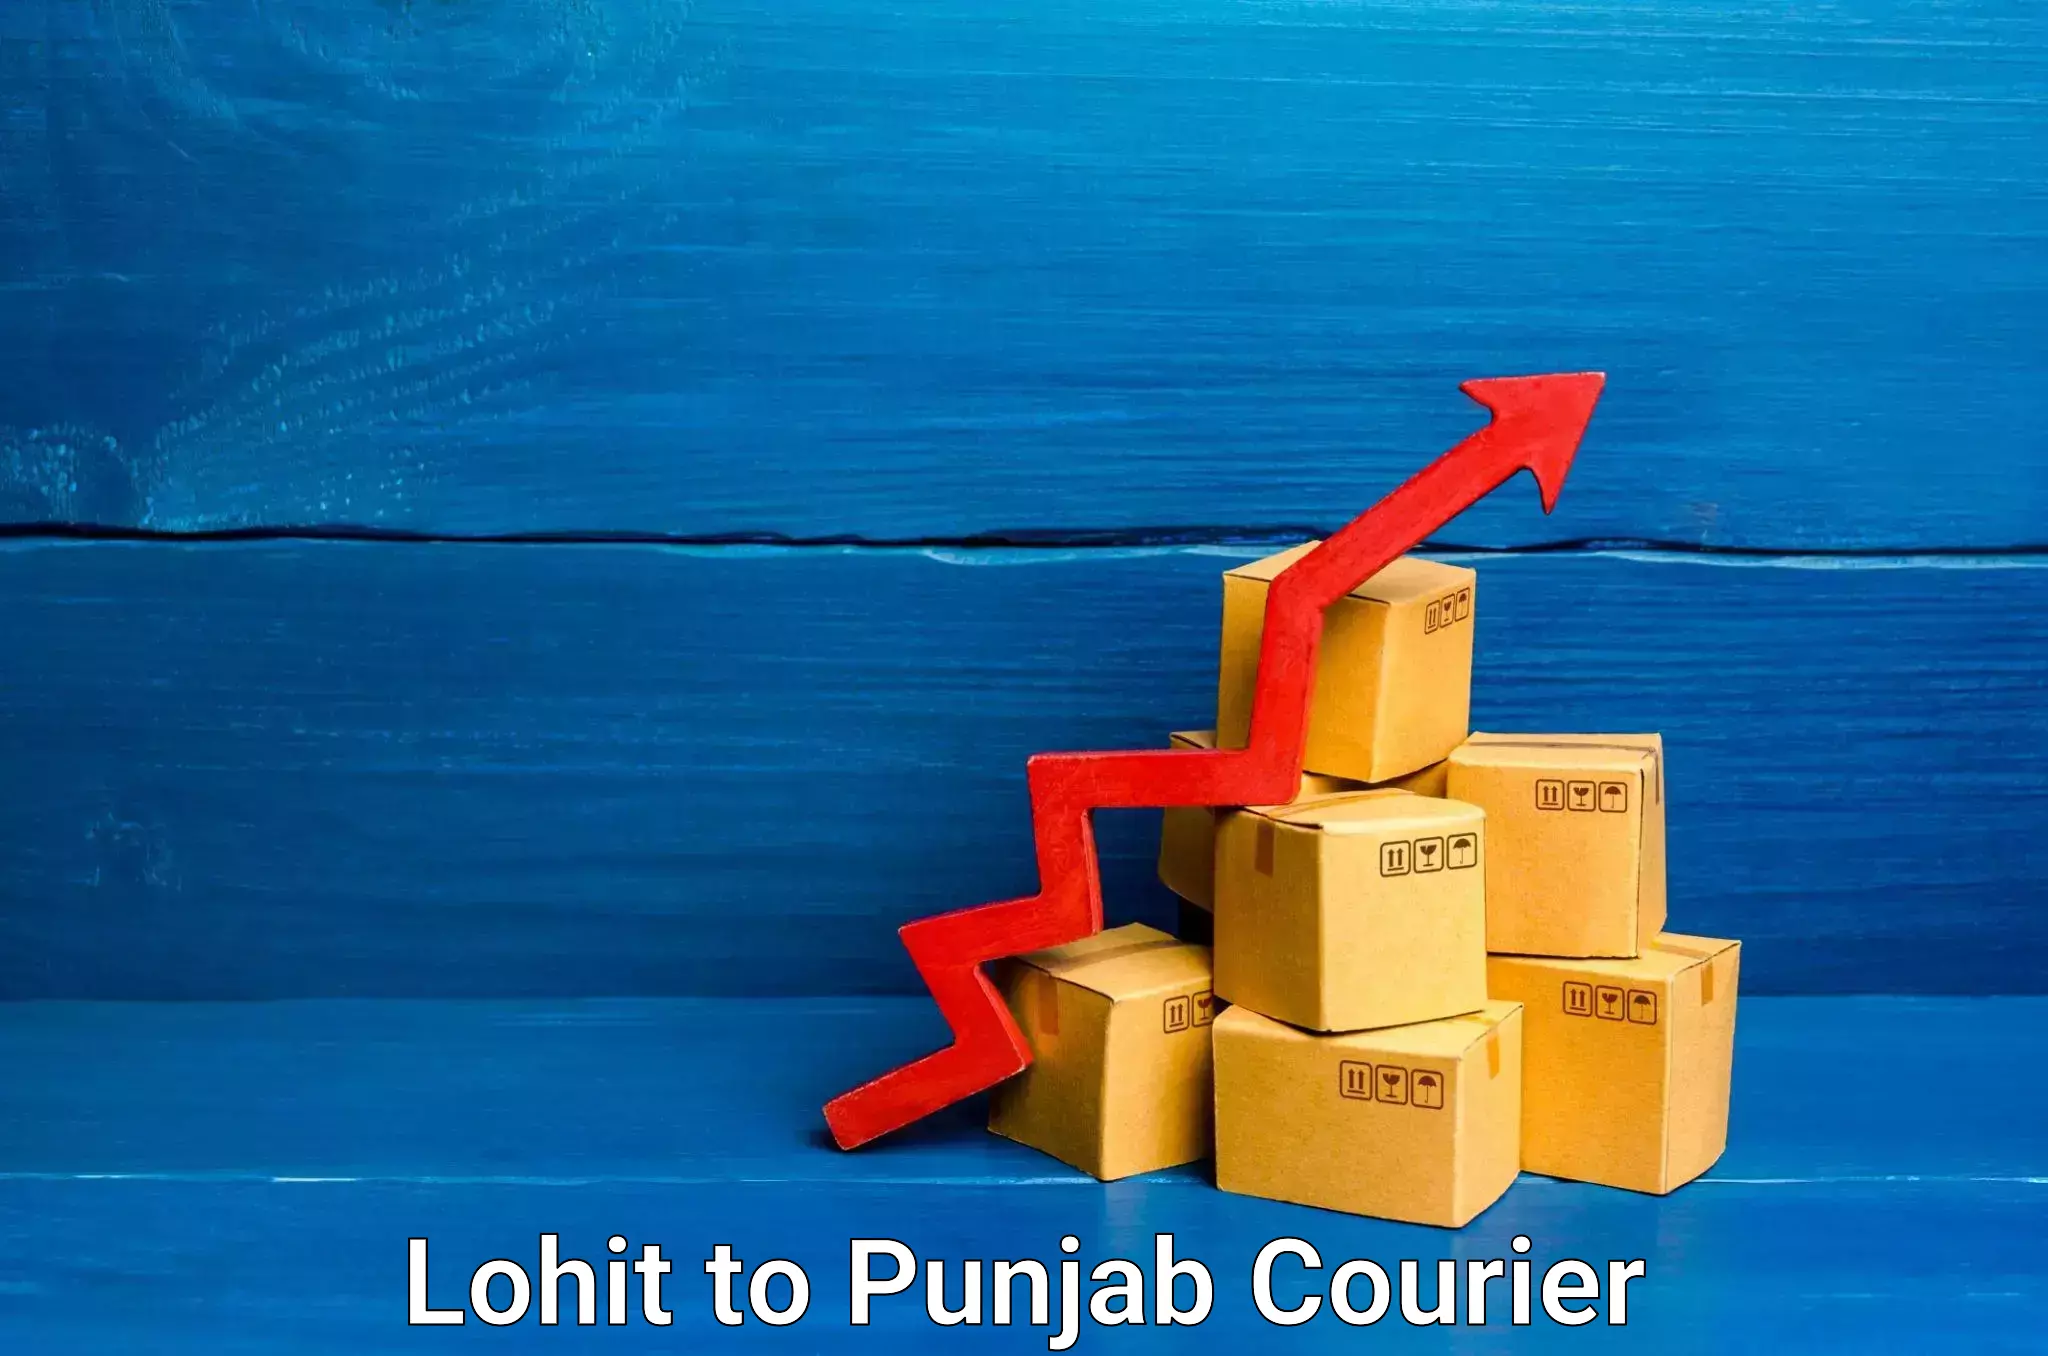 Customizable delivery plans Lohit to Ajnala